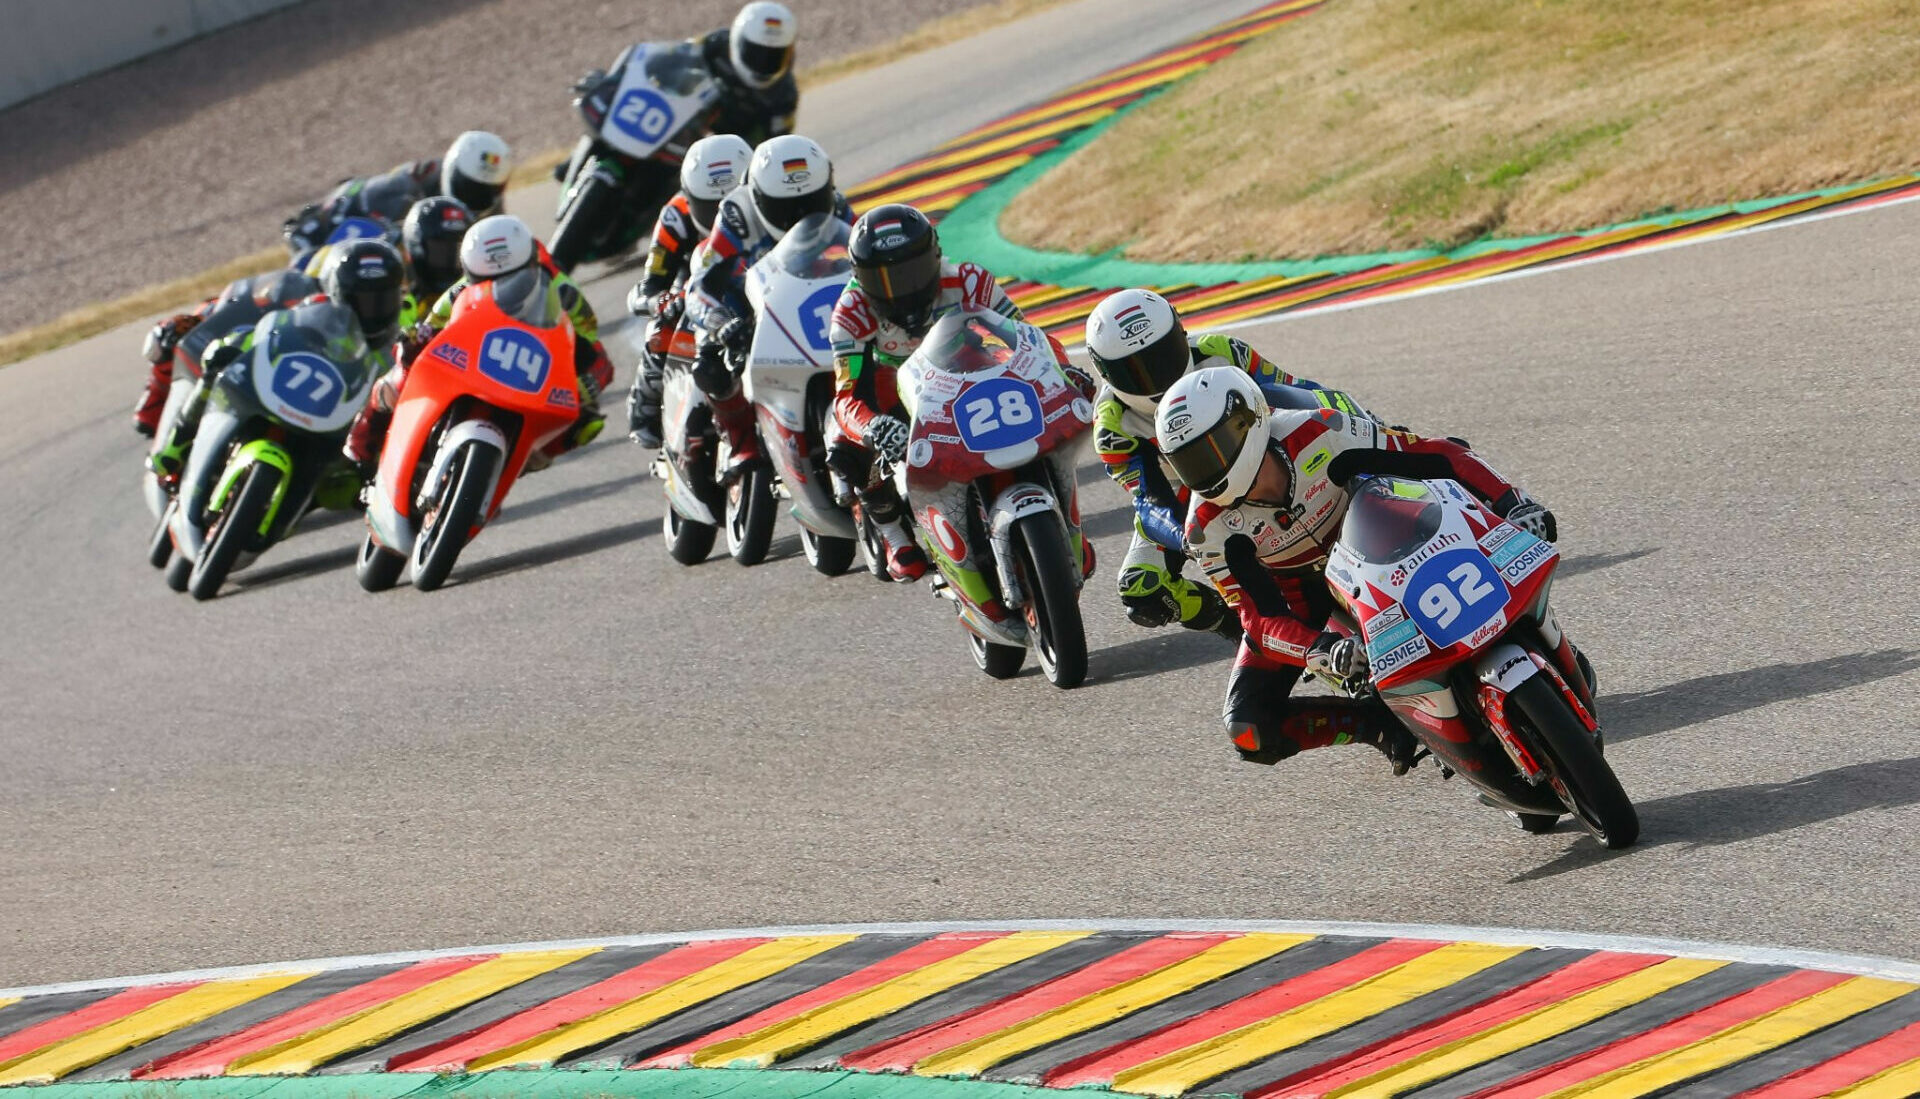 American-born Rossi Moor (92) leading Northern Talent Cup Race One Saturday at Sachsenring. Photo courtesy Dorna.